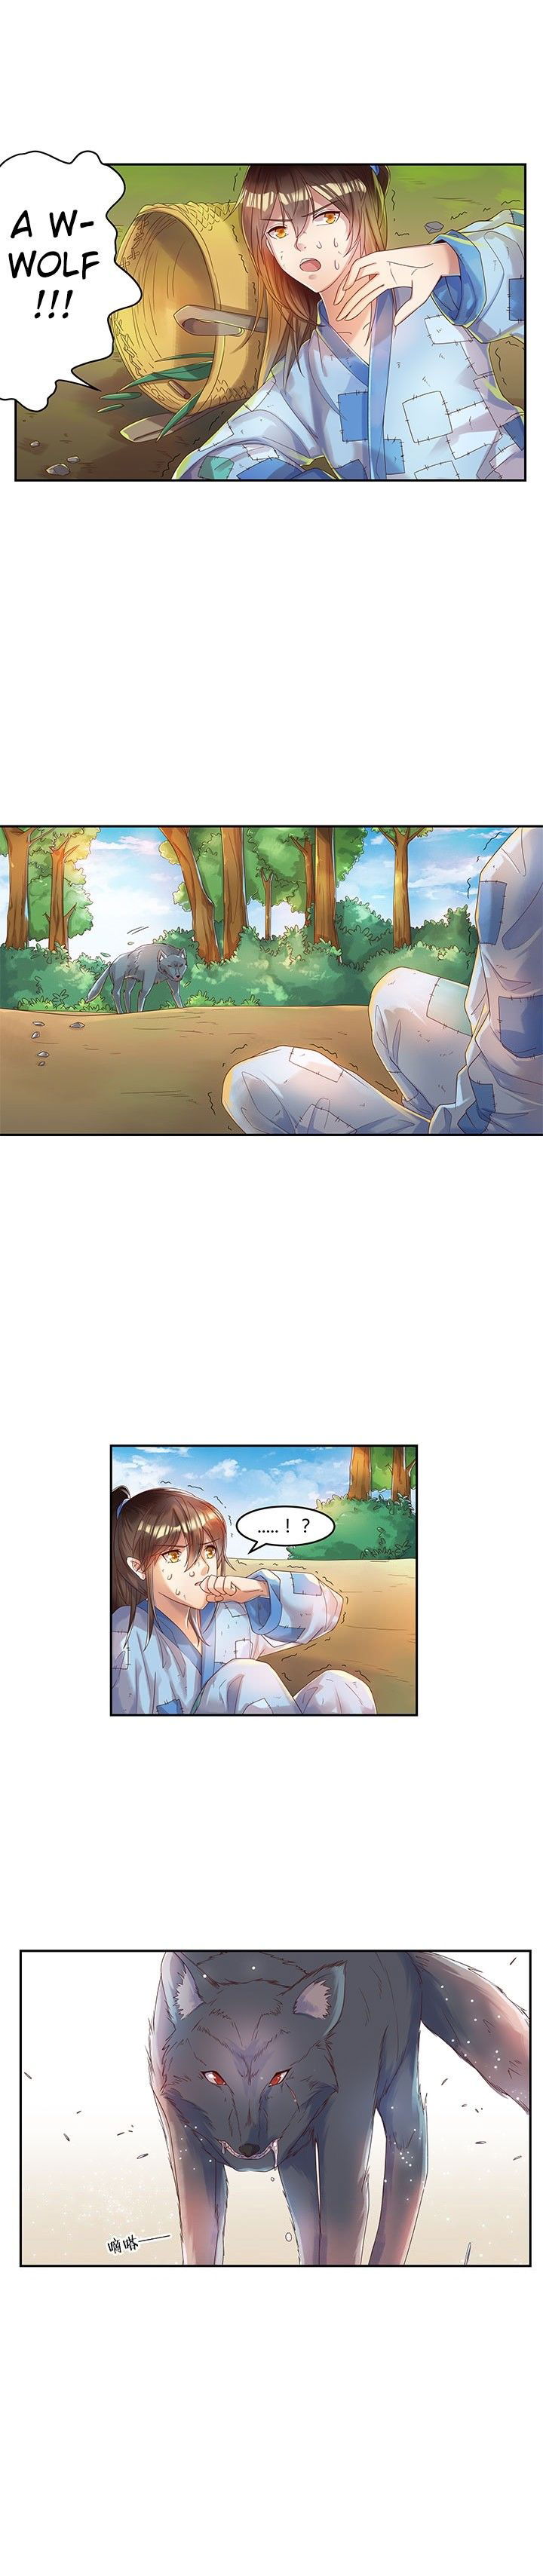 Path to Transcendence Chapter 001 page 6